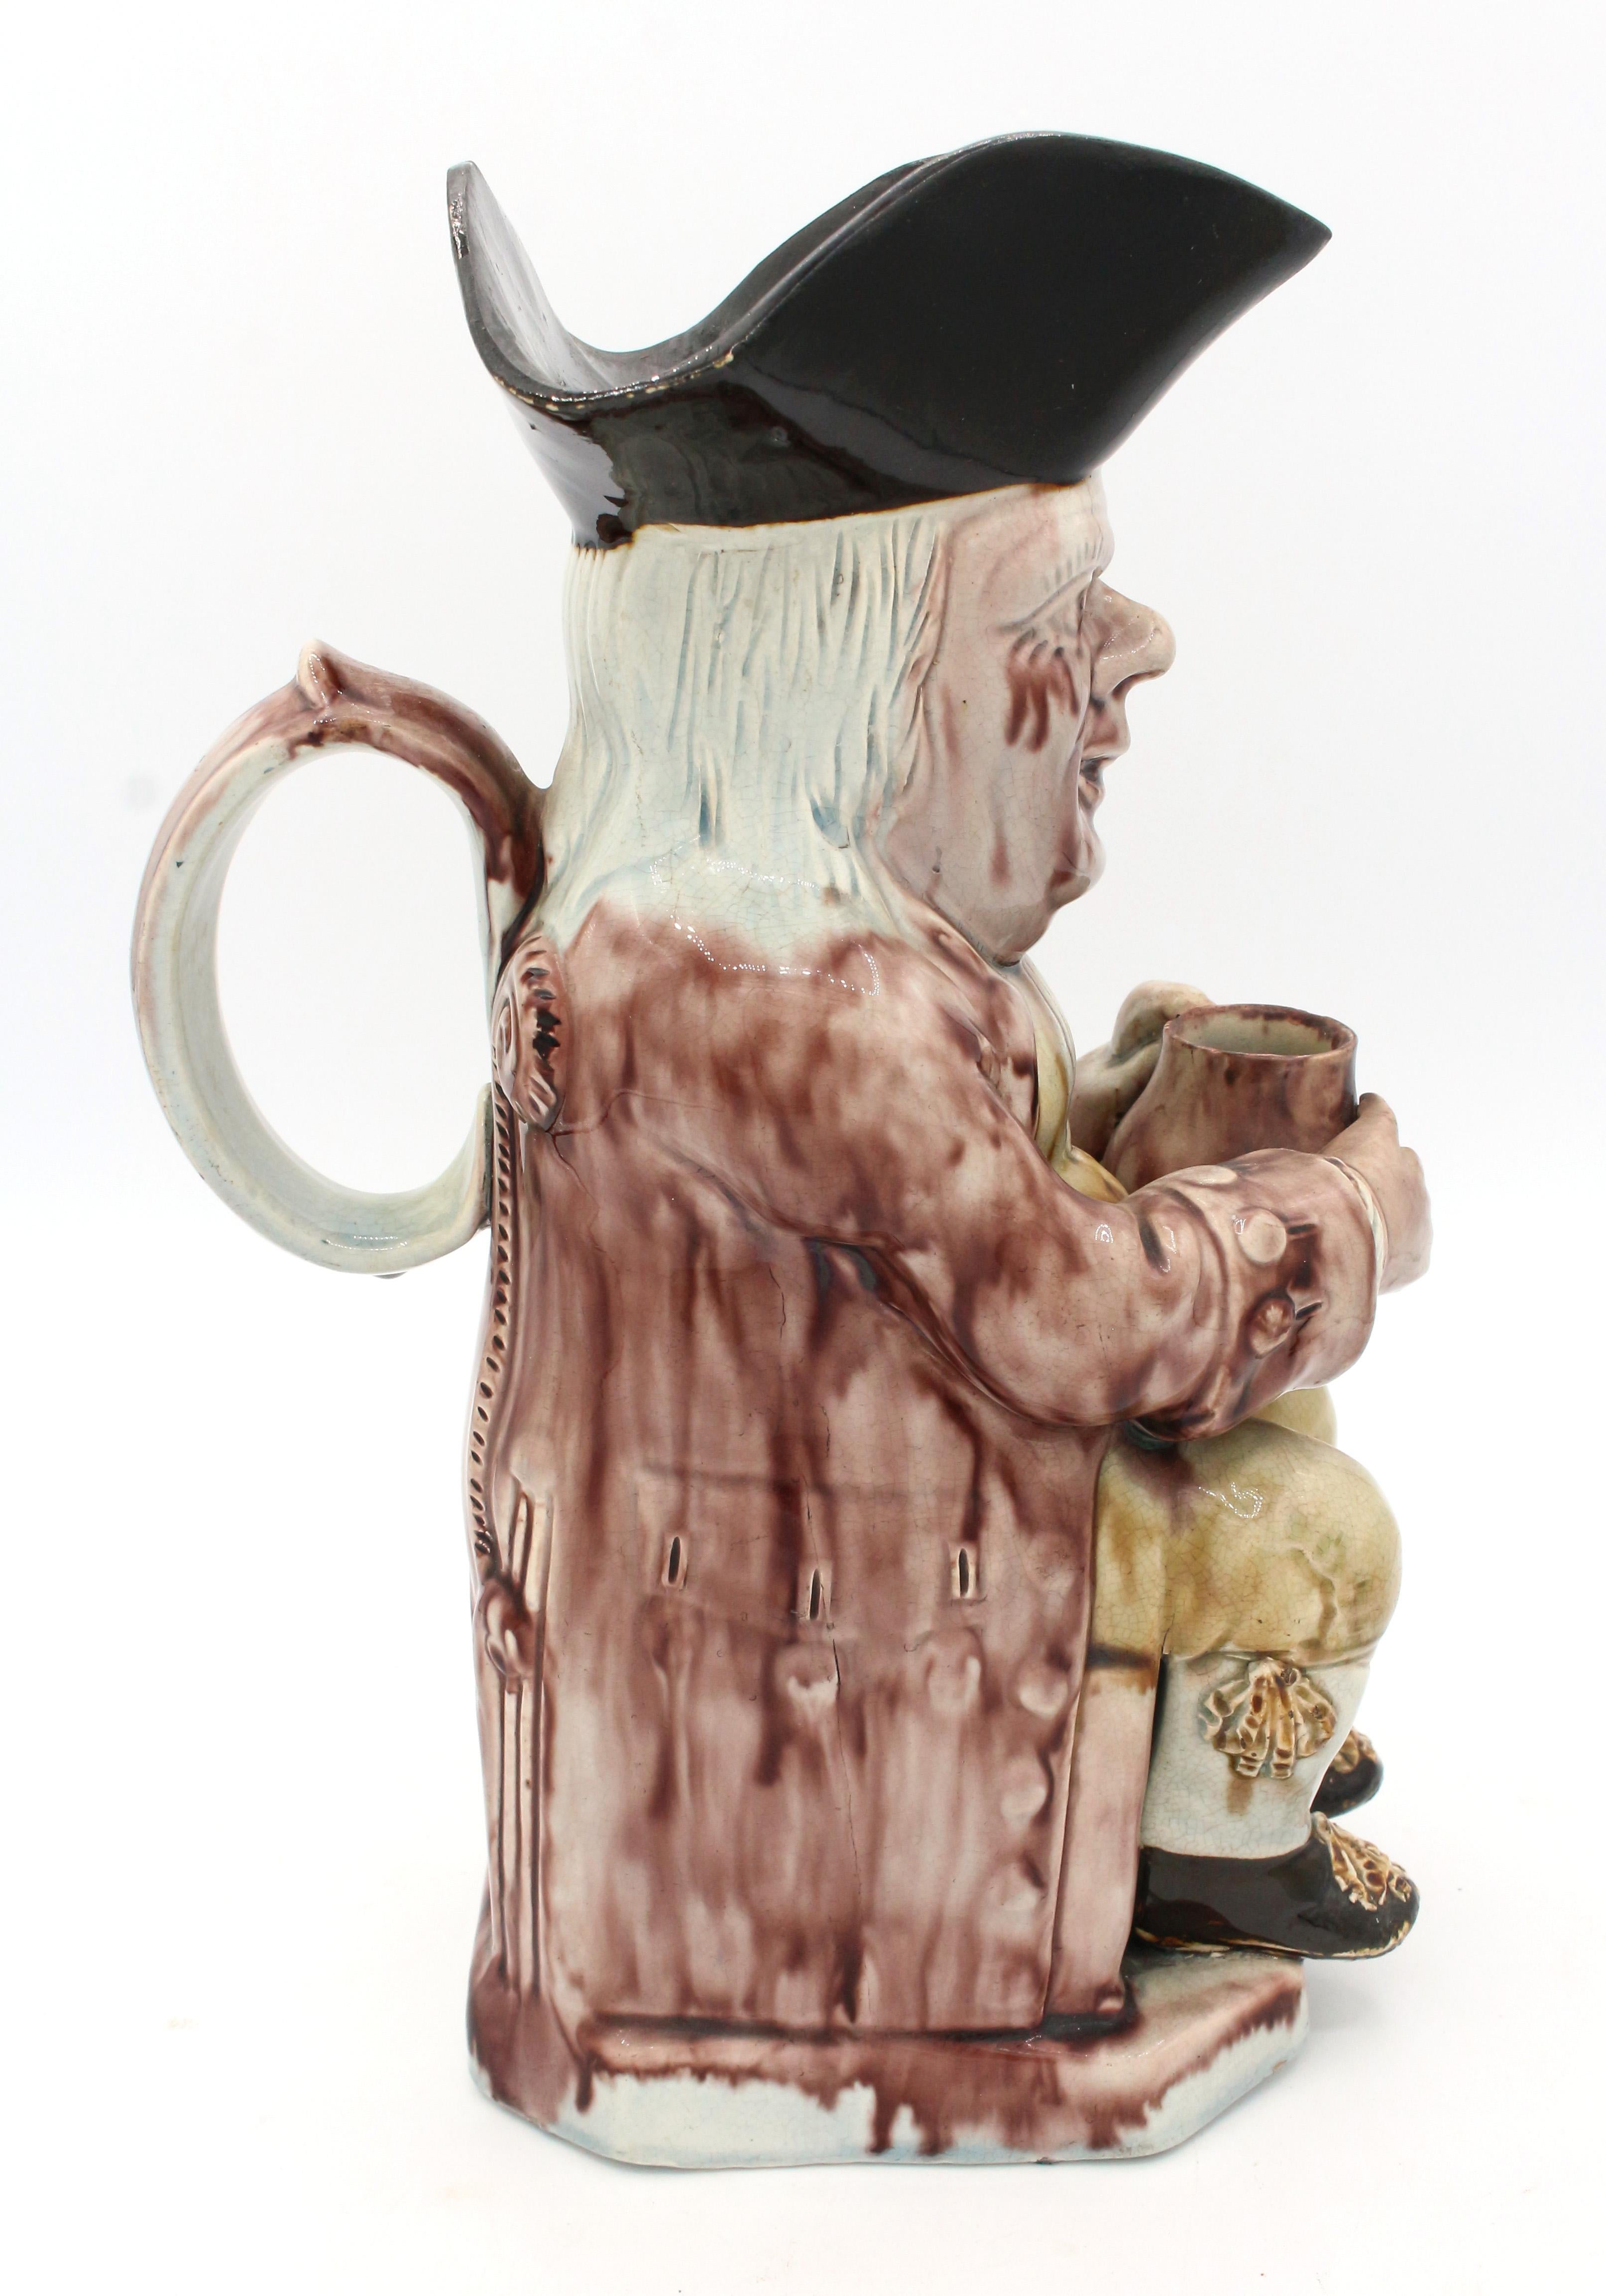 19th Century Circa 1860-80 Toby Jug of a 'Collier' with jug, English